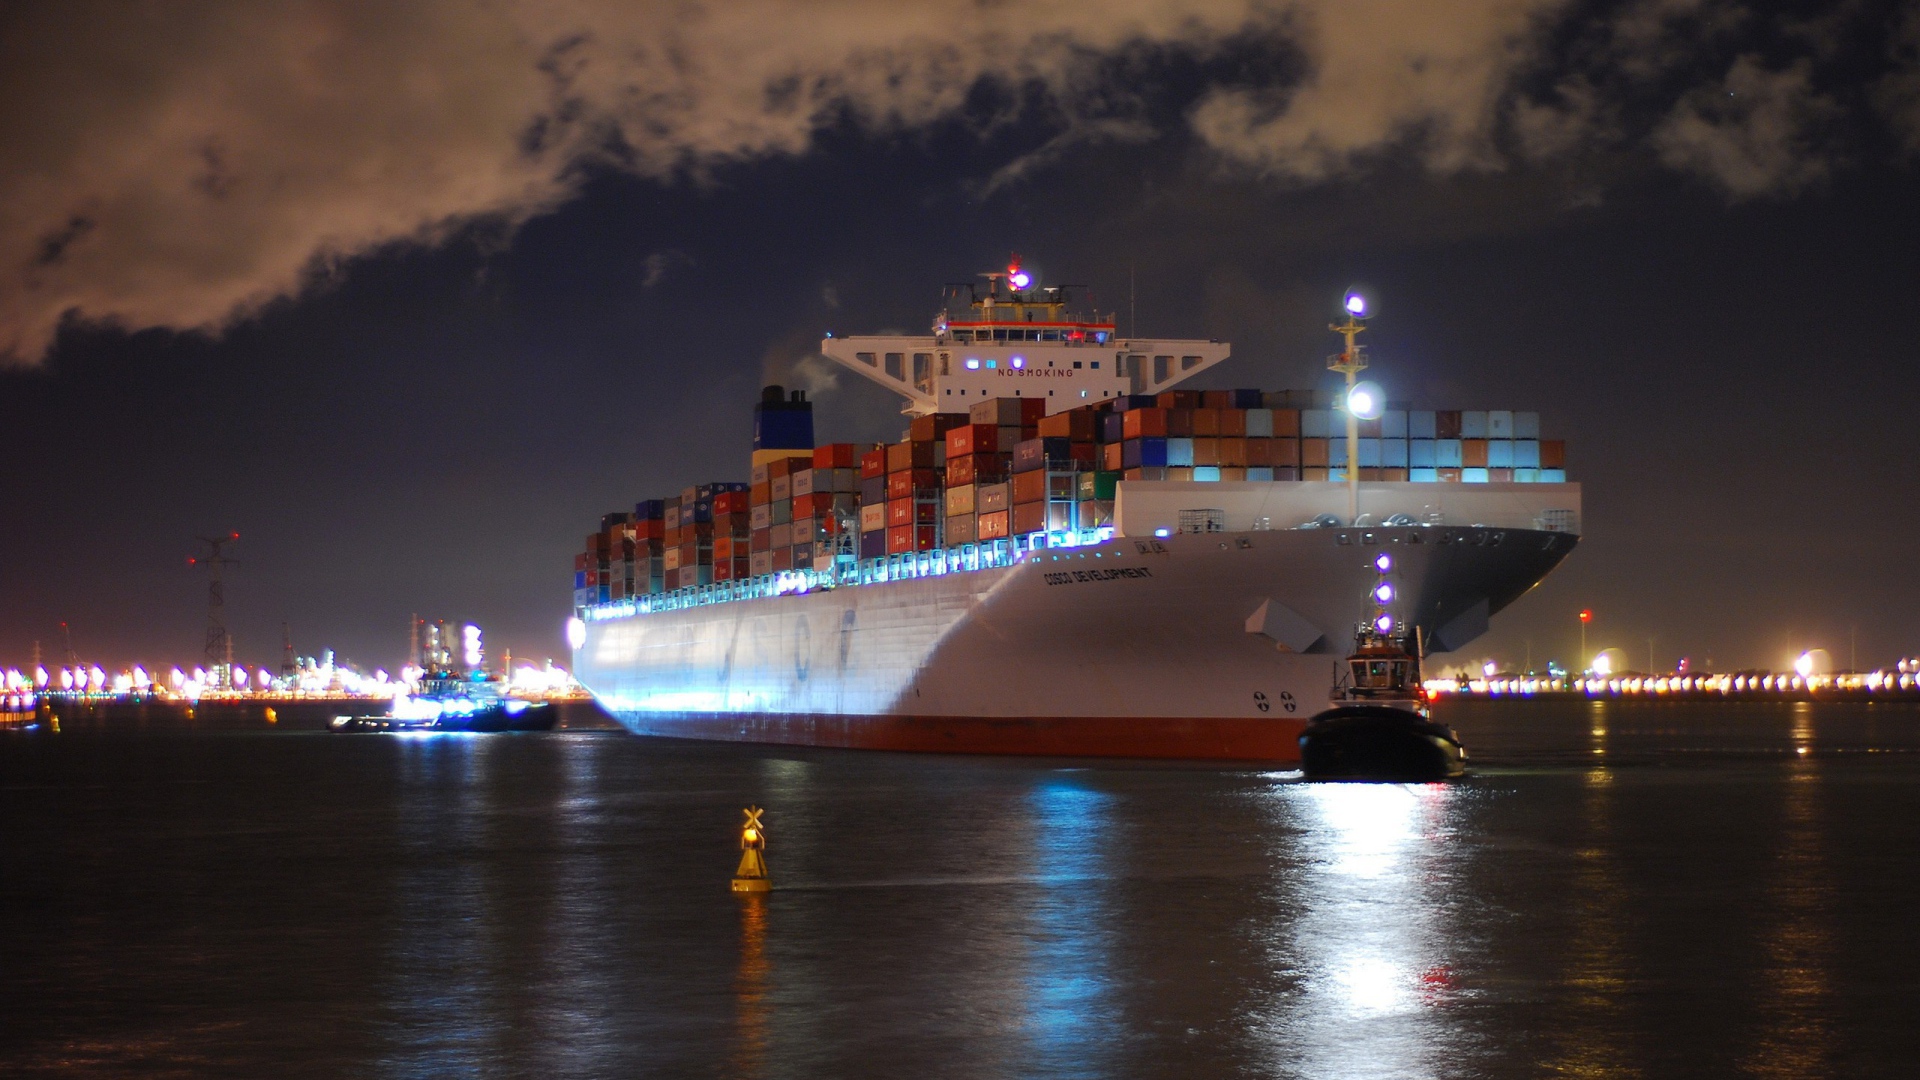 Cosco Container ship in the port